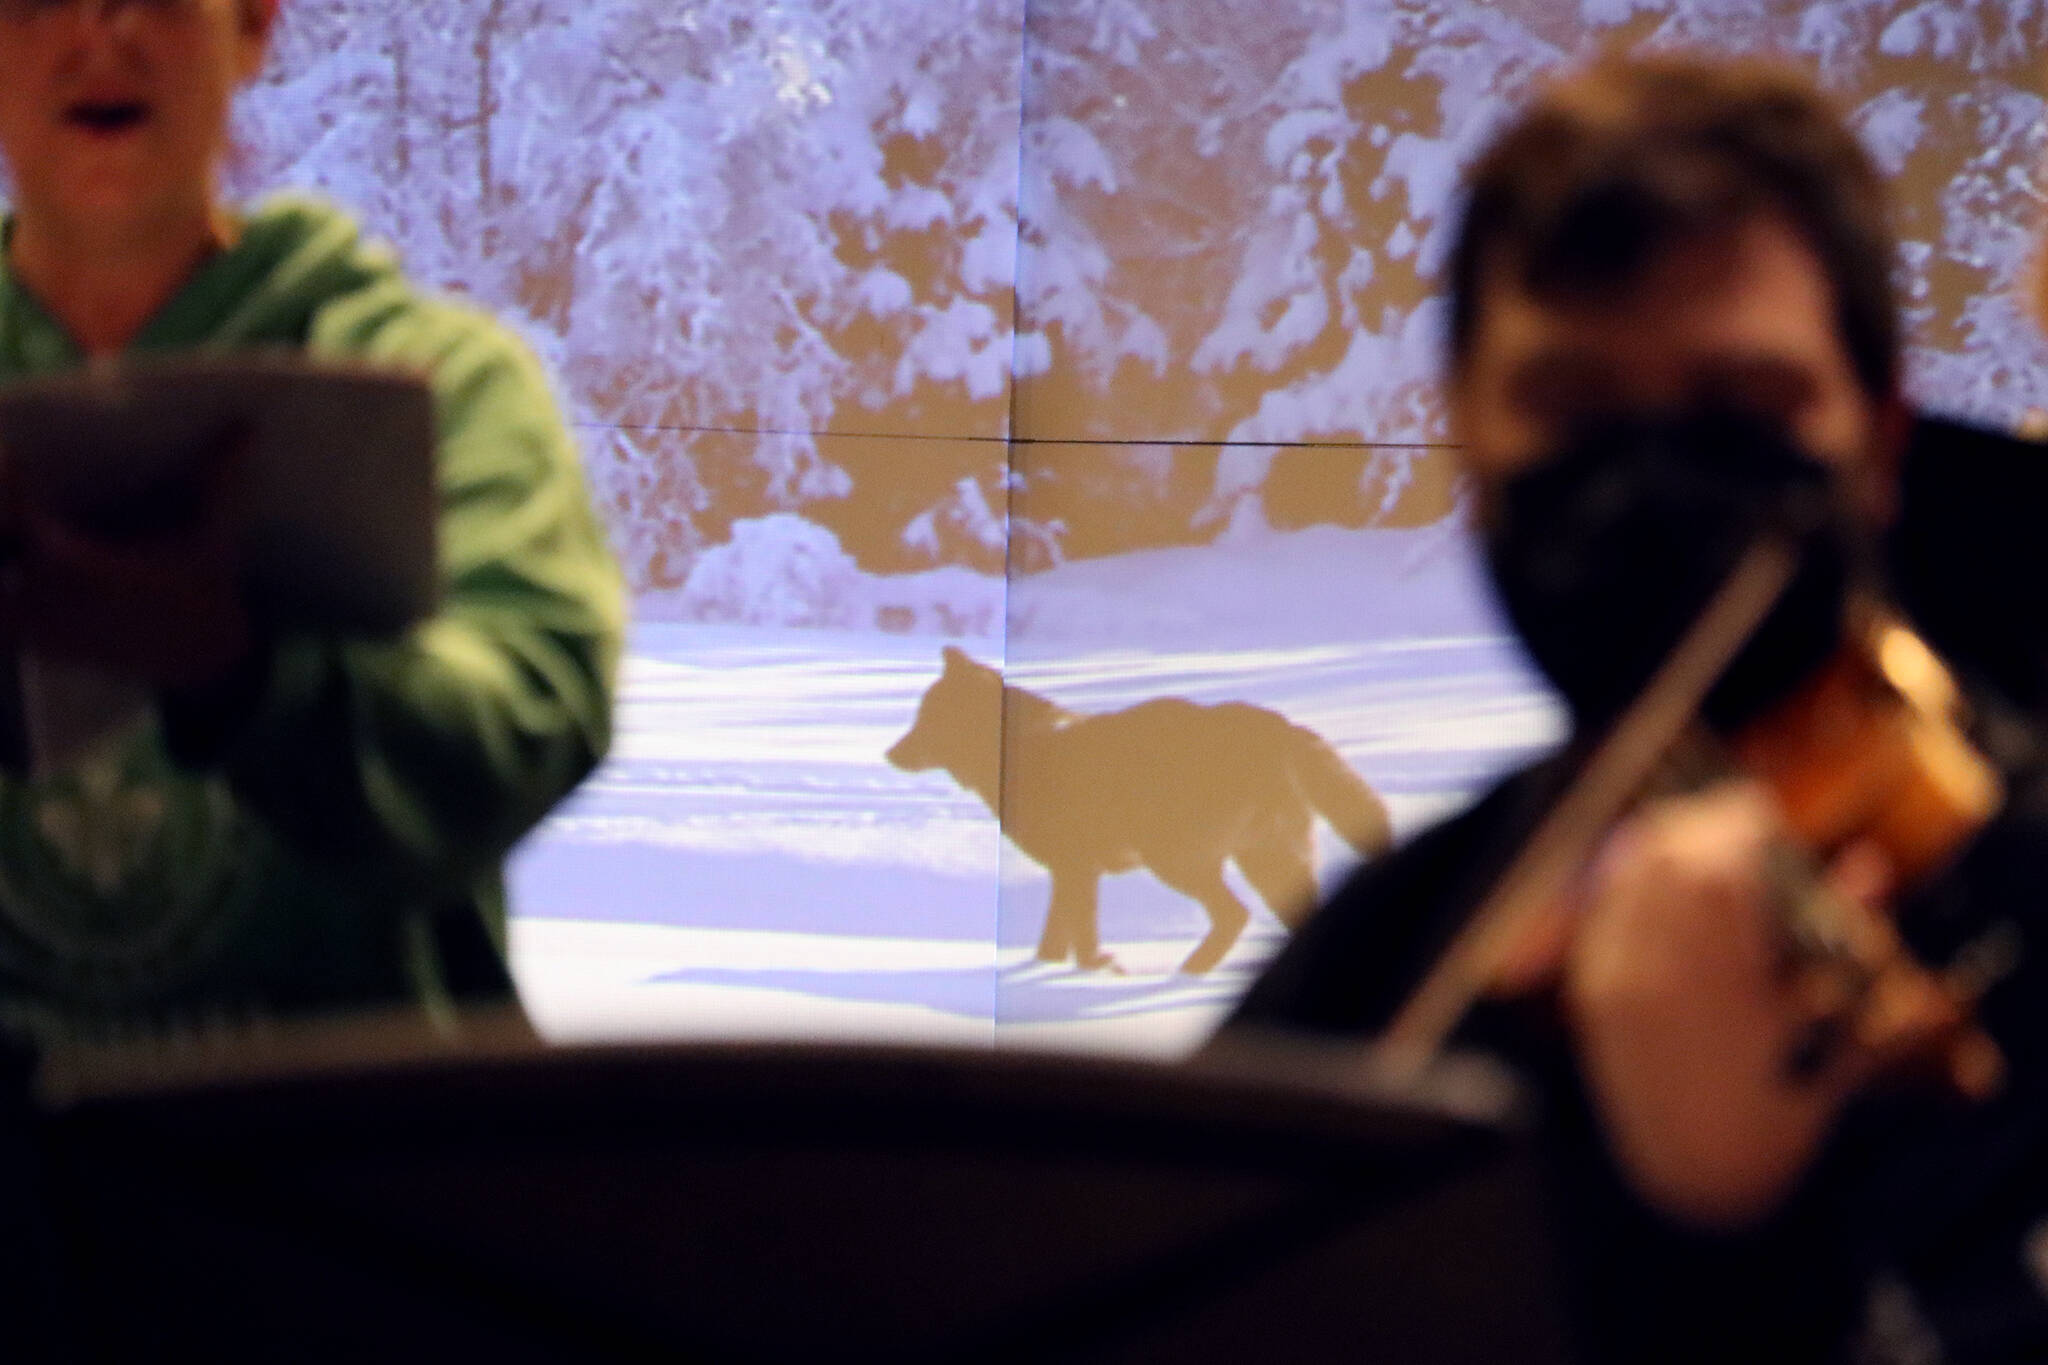 This photo shows a photo of Romeo the wolf framed by Heather Mitchell and Franz Felkl during rehearsals for “Black Wolf” one of two songs that comprise “Wolf Songs.”